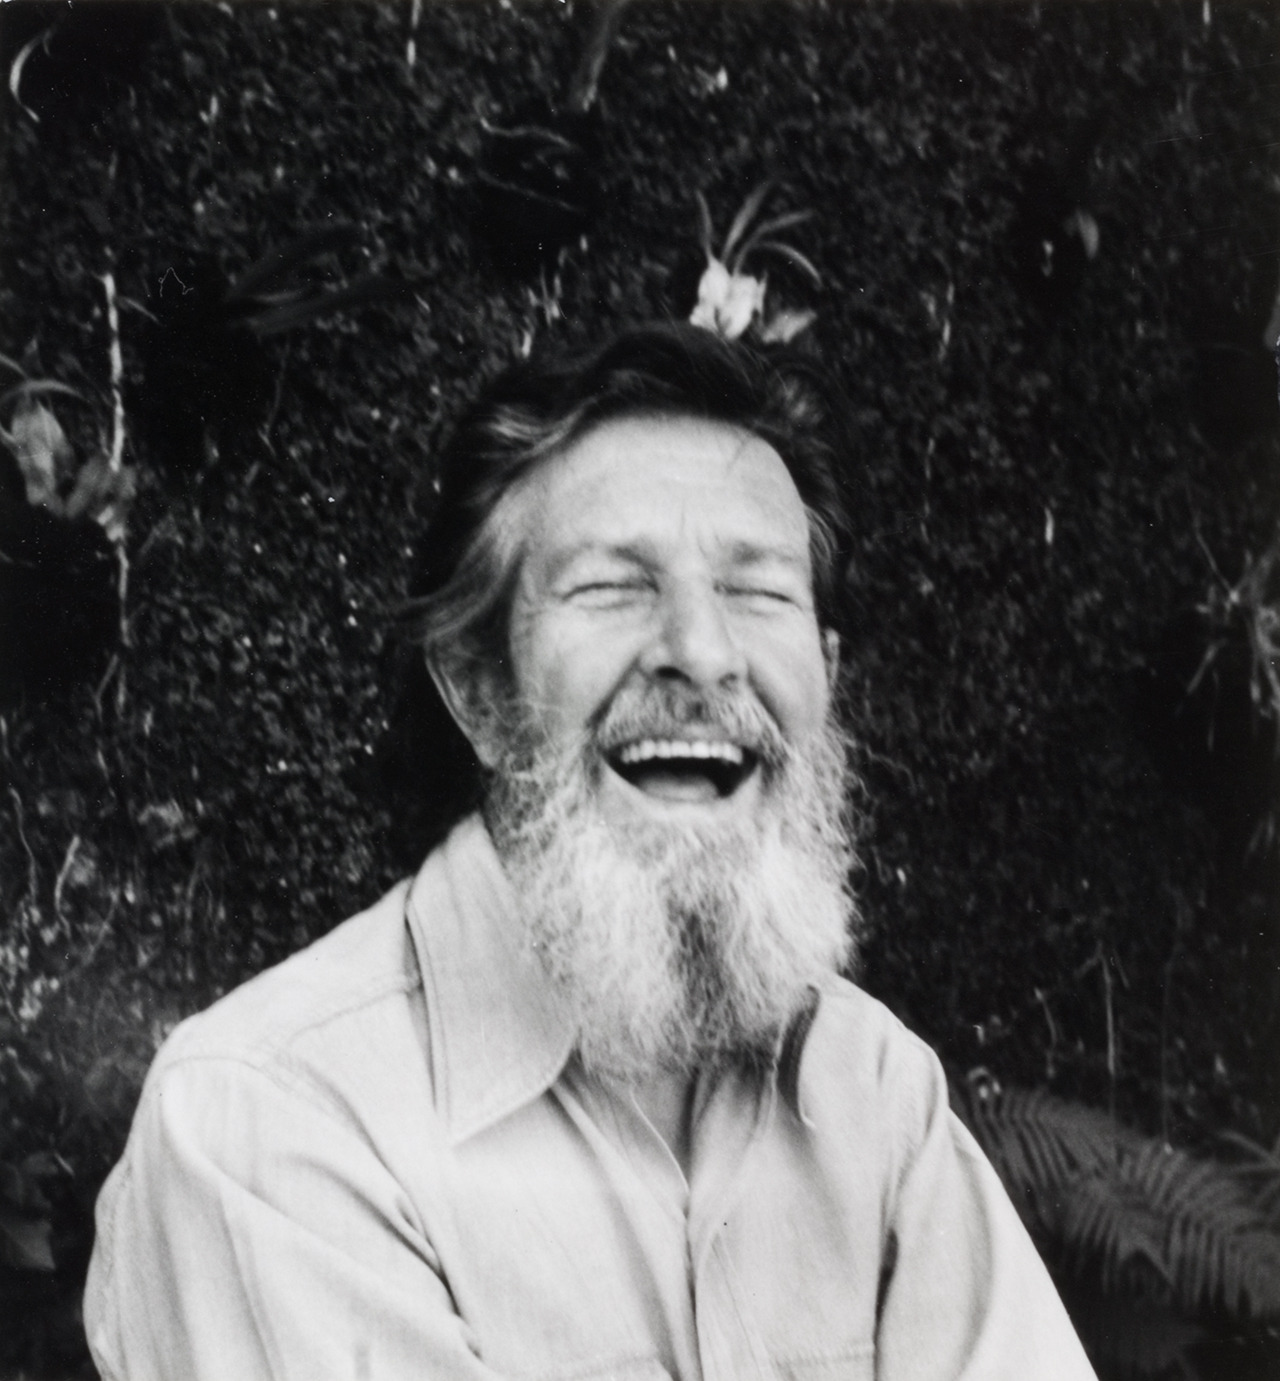 philamuseum:
“ Happy birthday to American avant-garde composer, music theorist, writer, and artist John Cage.
“John Cage,” 1970–80, by Dorothy Norman
”